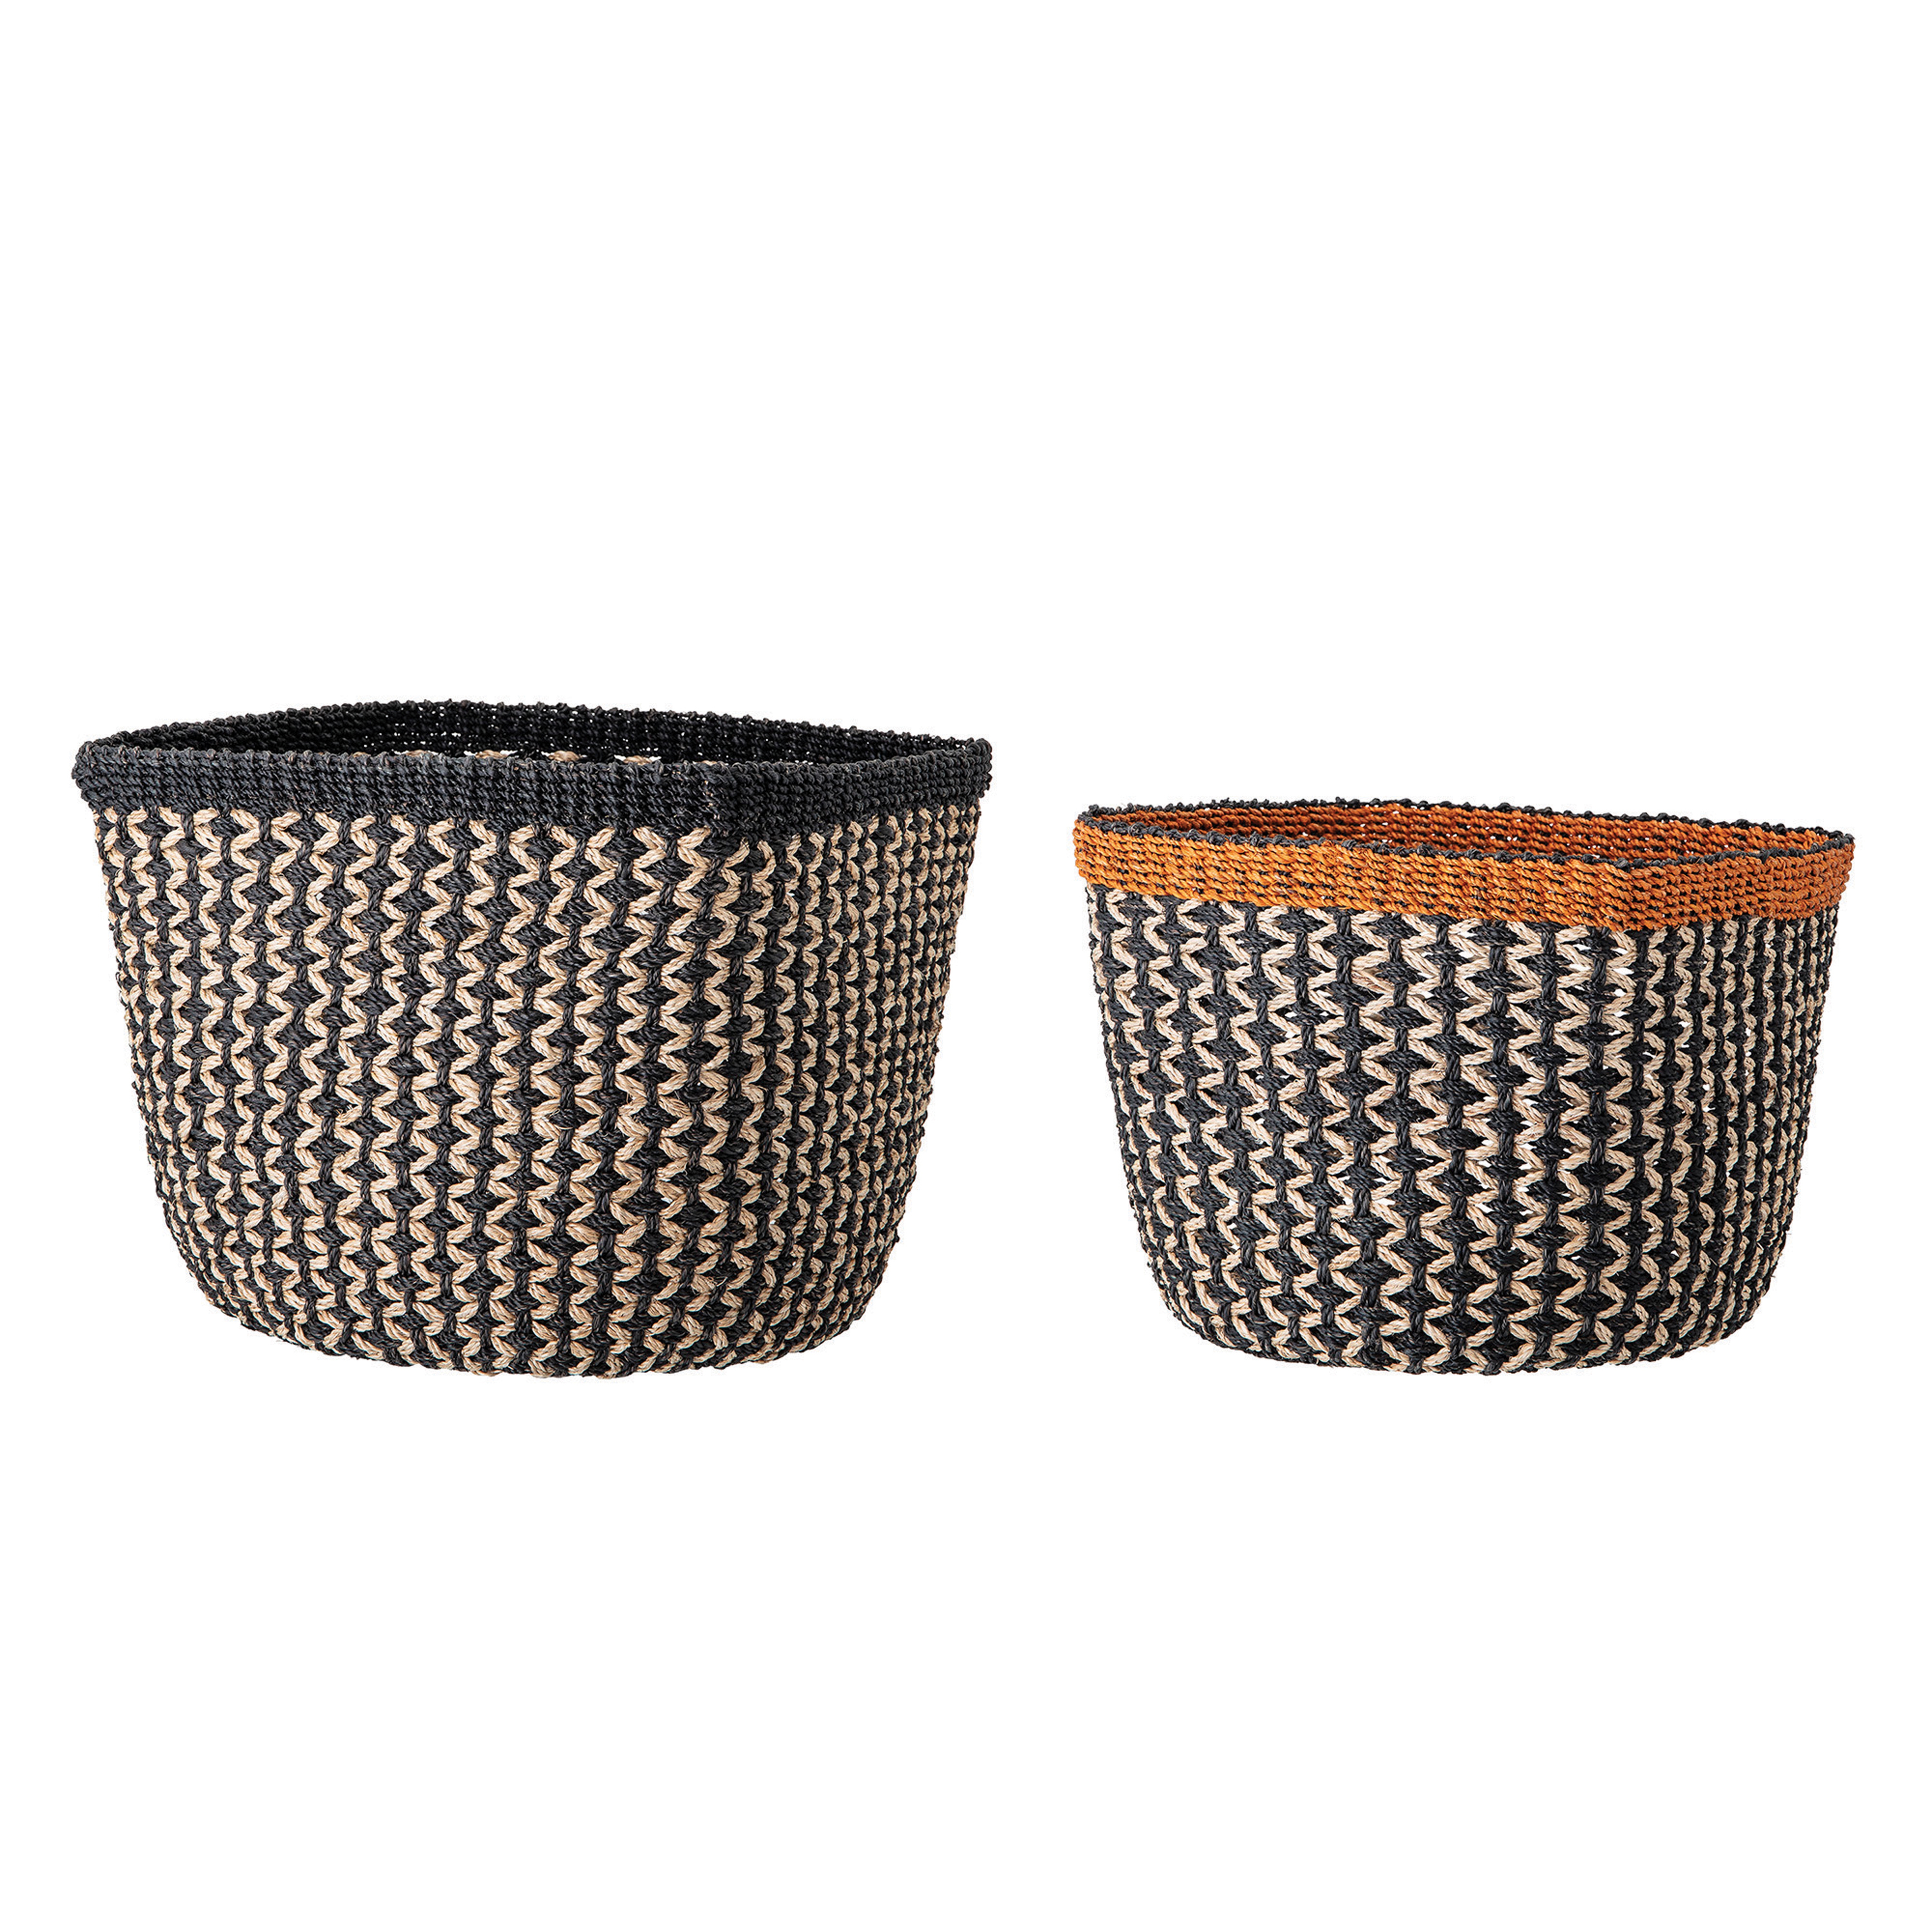 14" & 16" Handwoven Abaca Baskets (Set of 2 Sizes/Colors) - Moss & Wilder